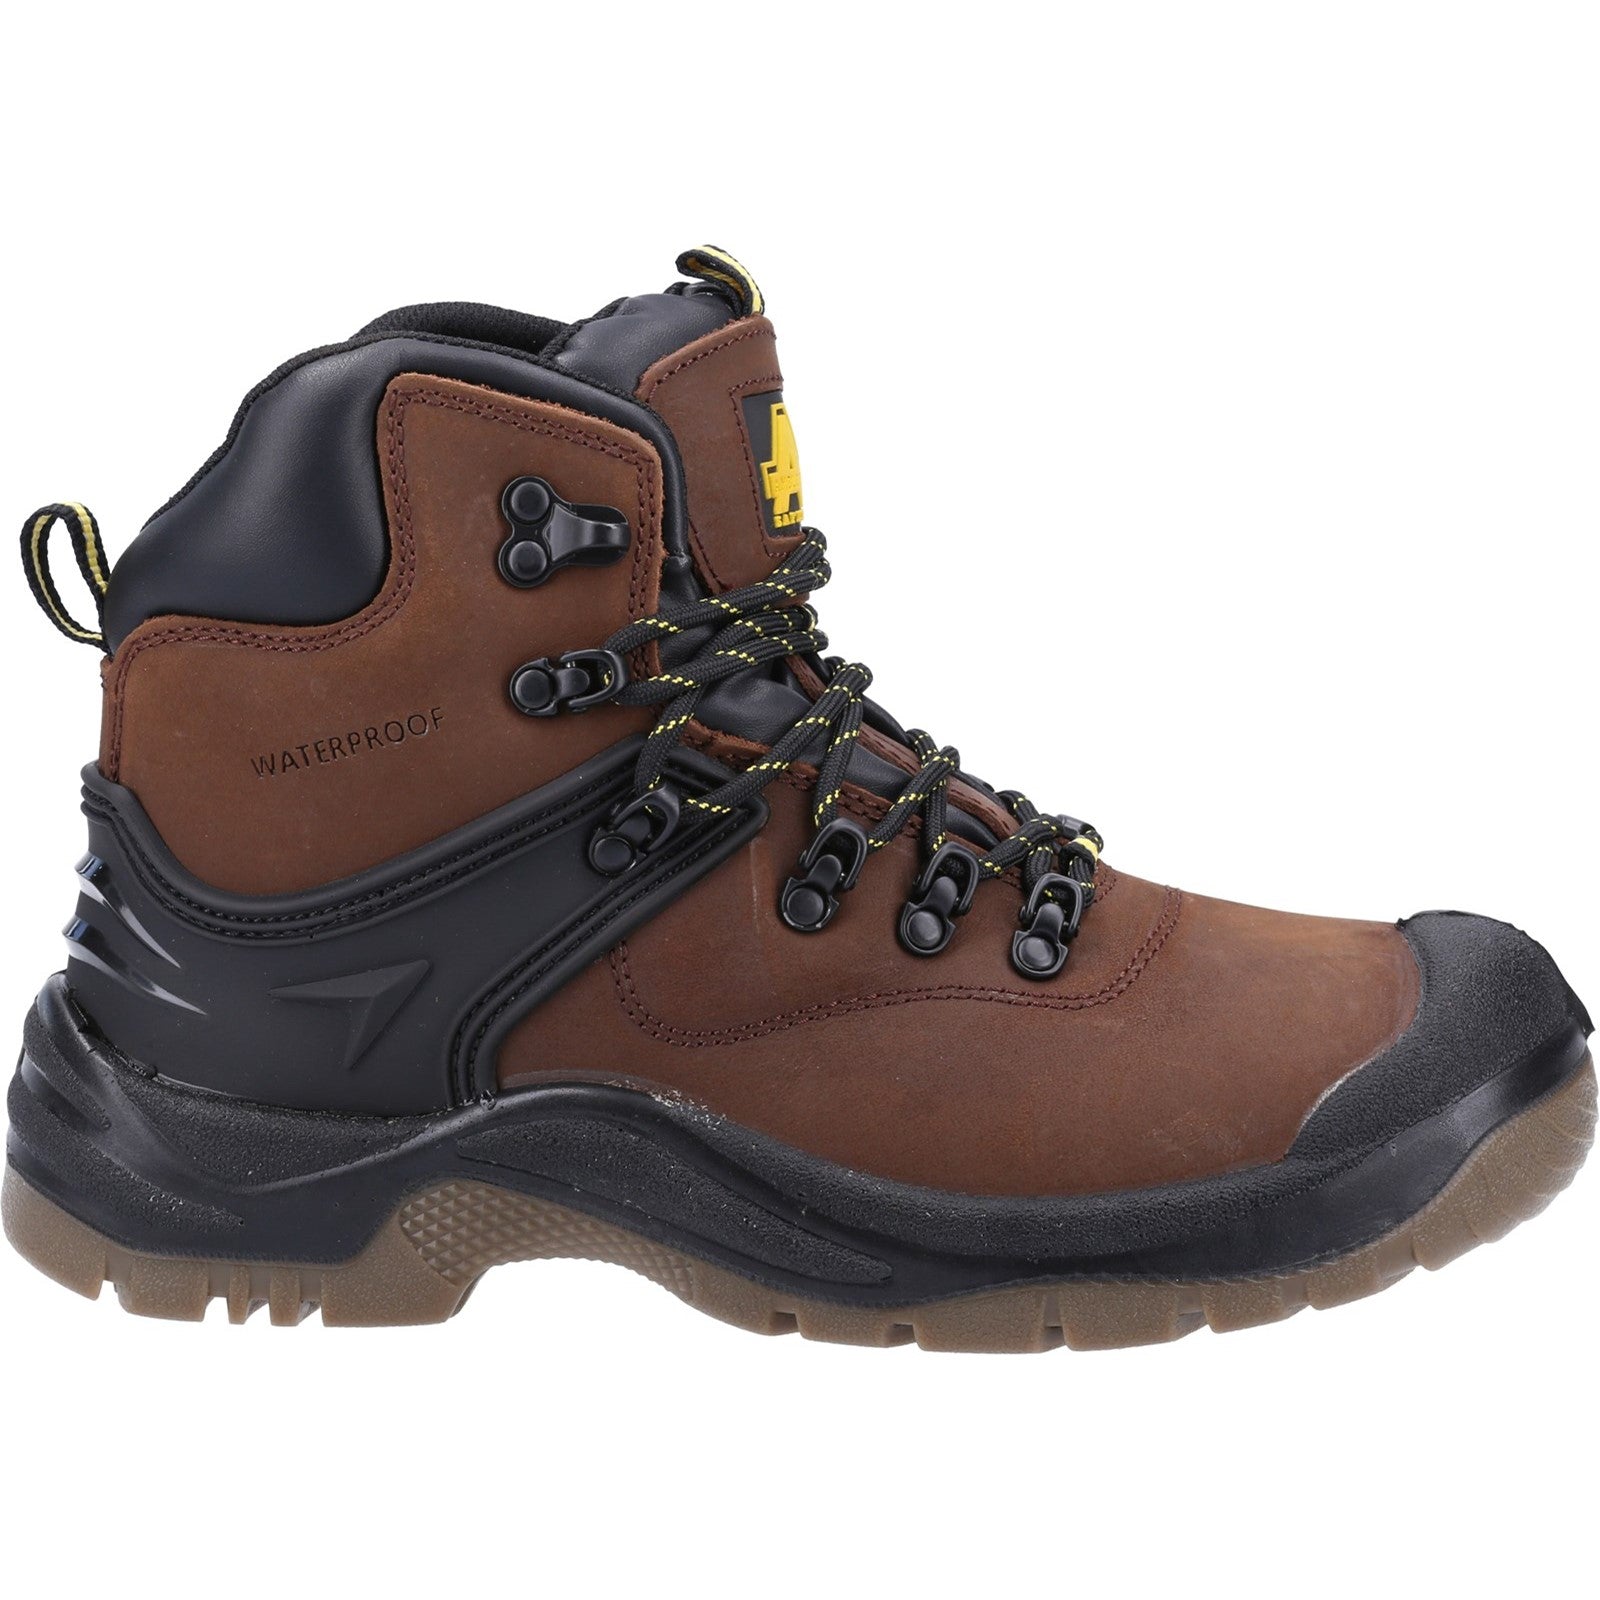 Amblers FS197 Safety Boot